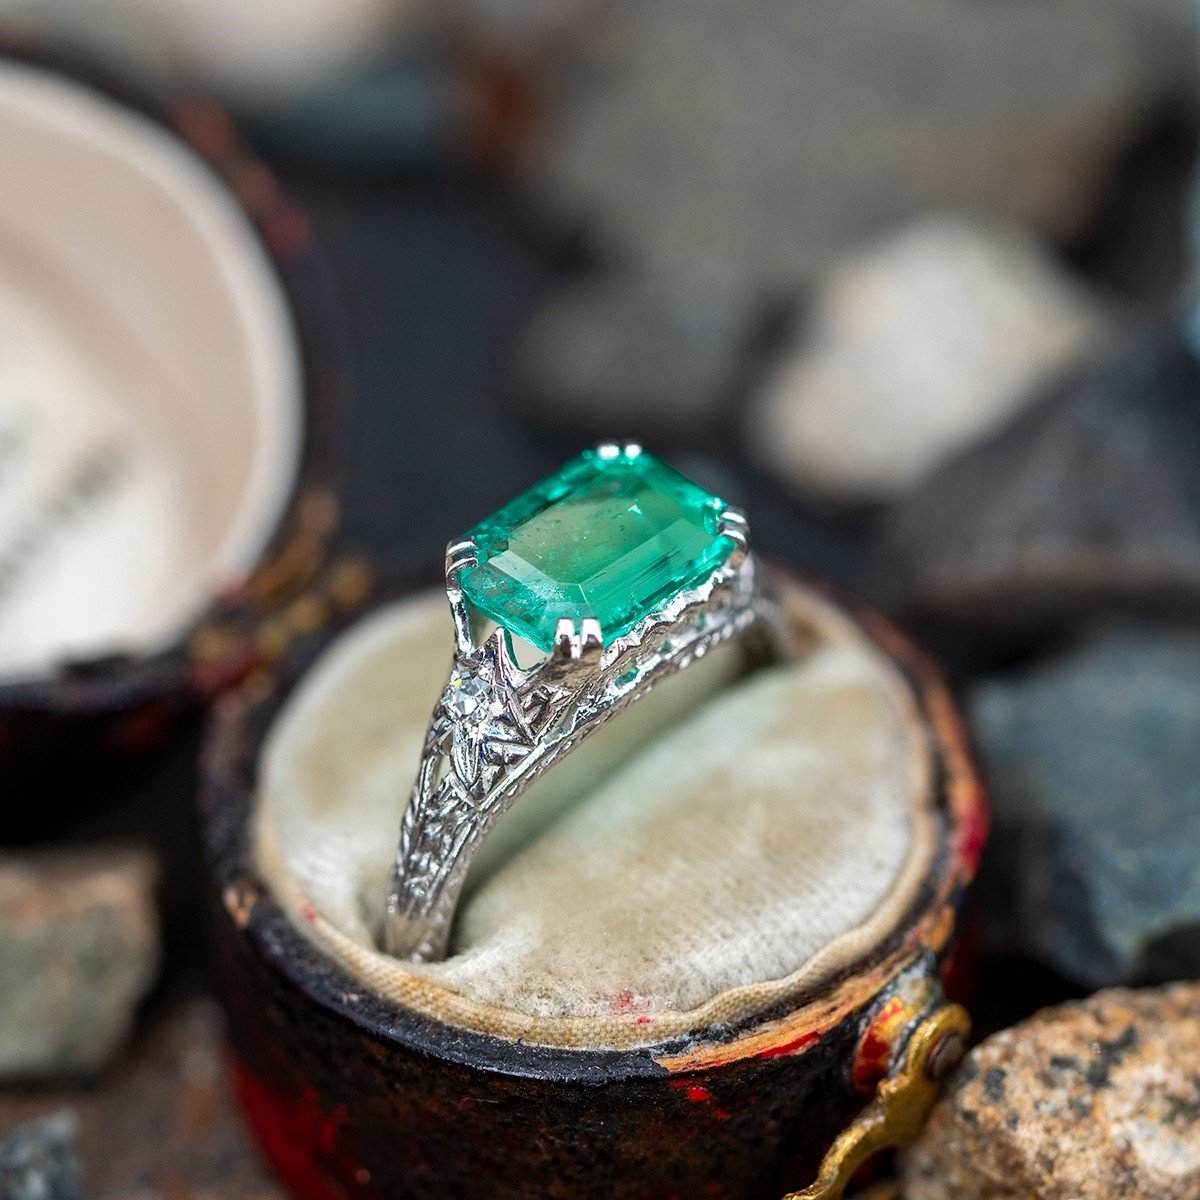 The Dazzling Prong Emerald Ring